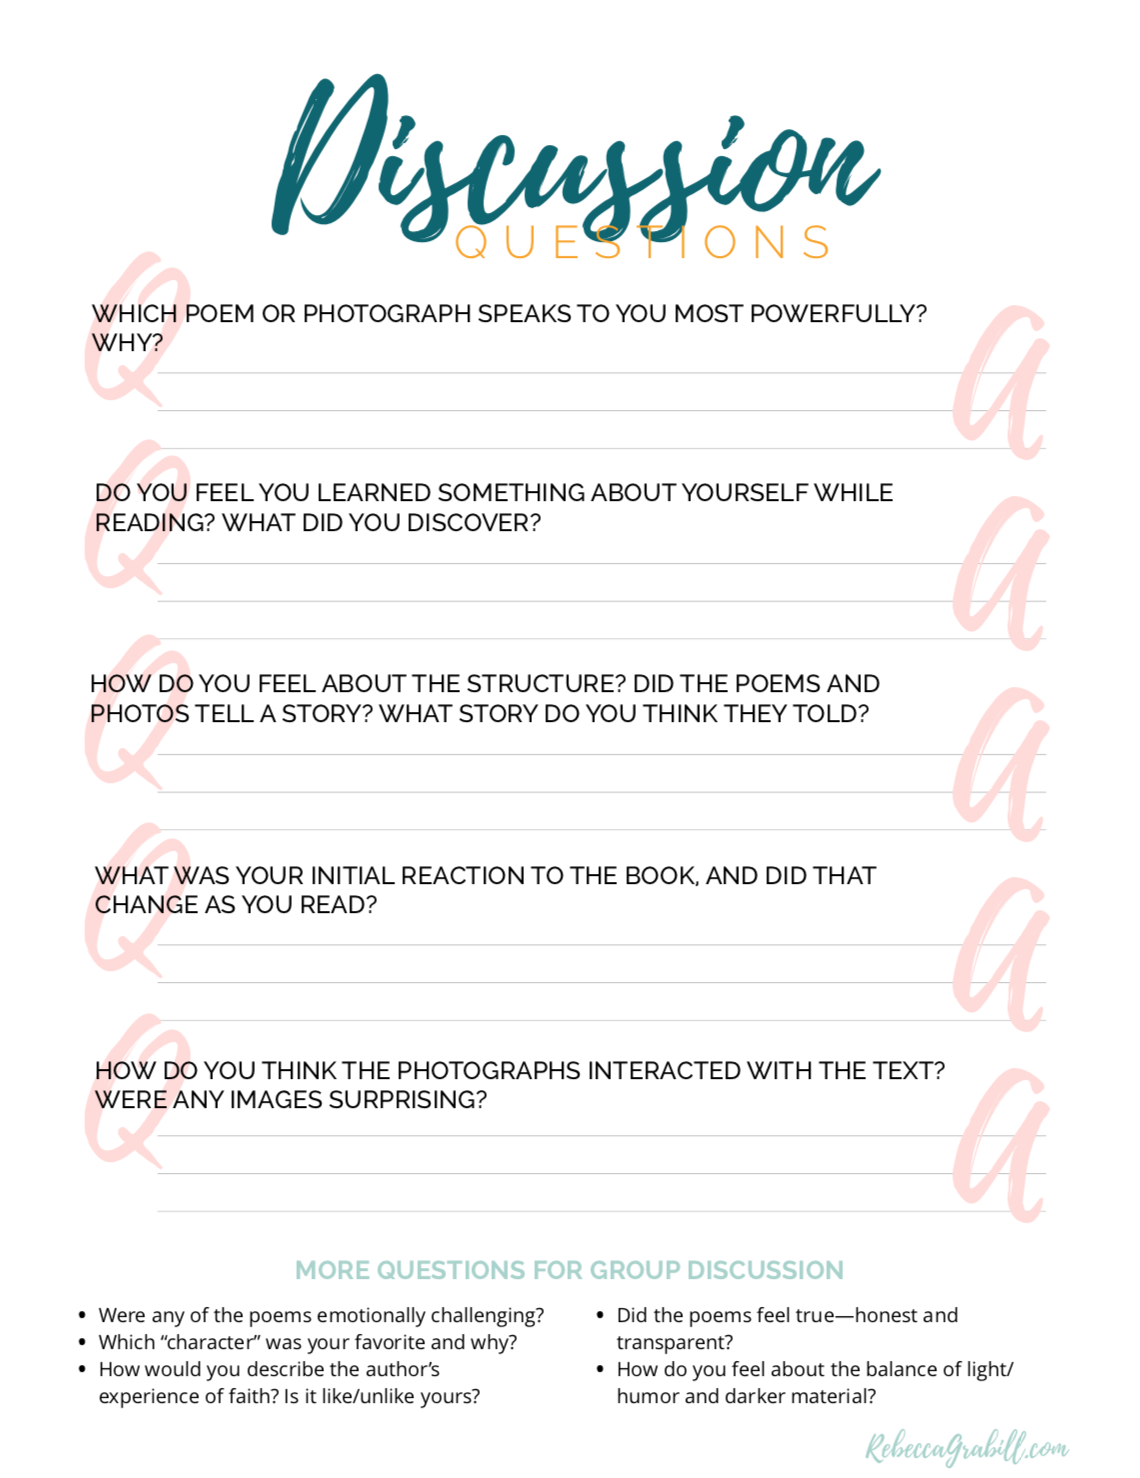 Sweetened Condensed Printable for Book Groups Discussion Questions